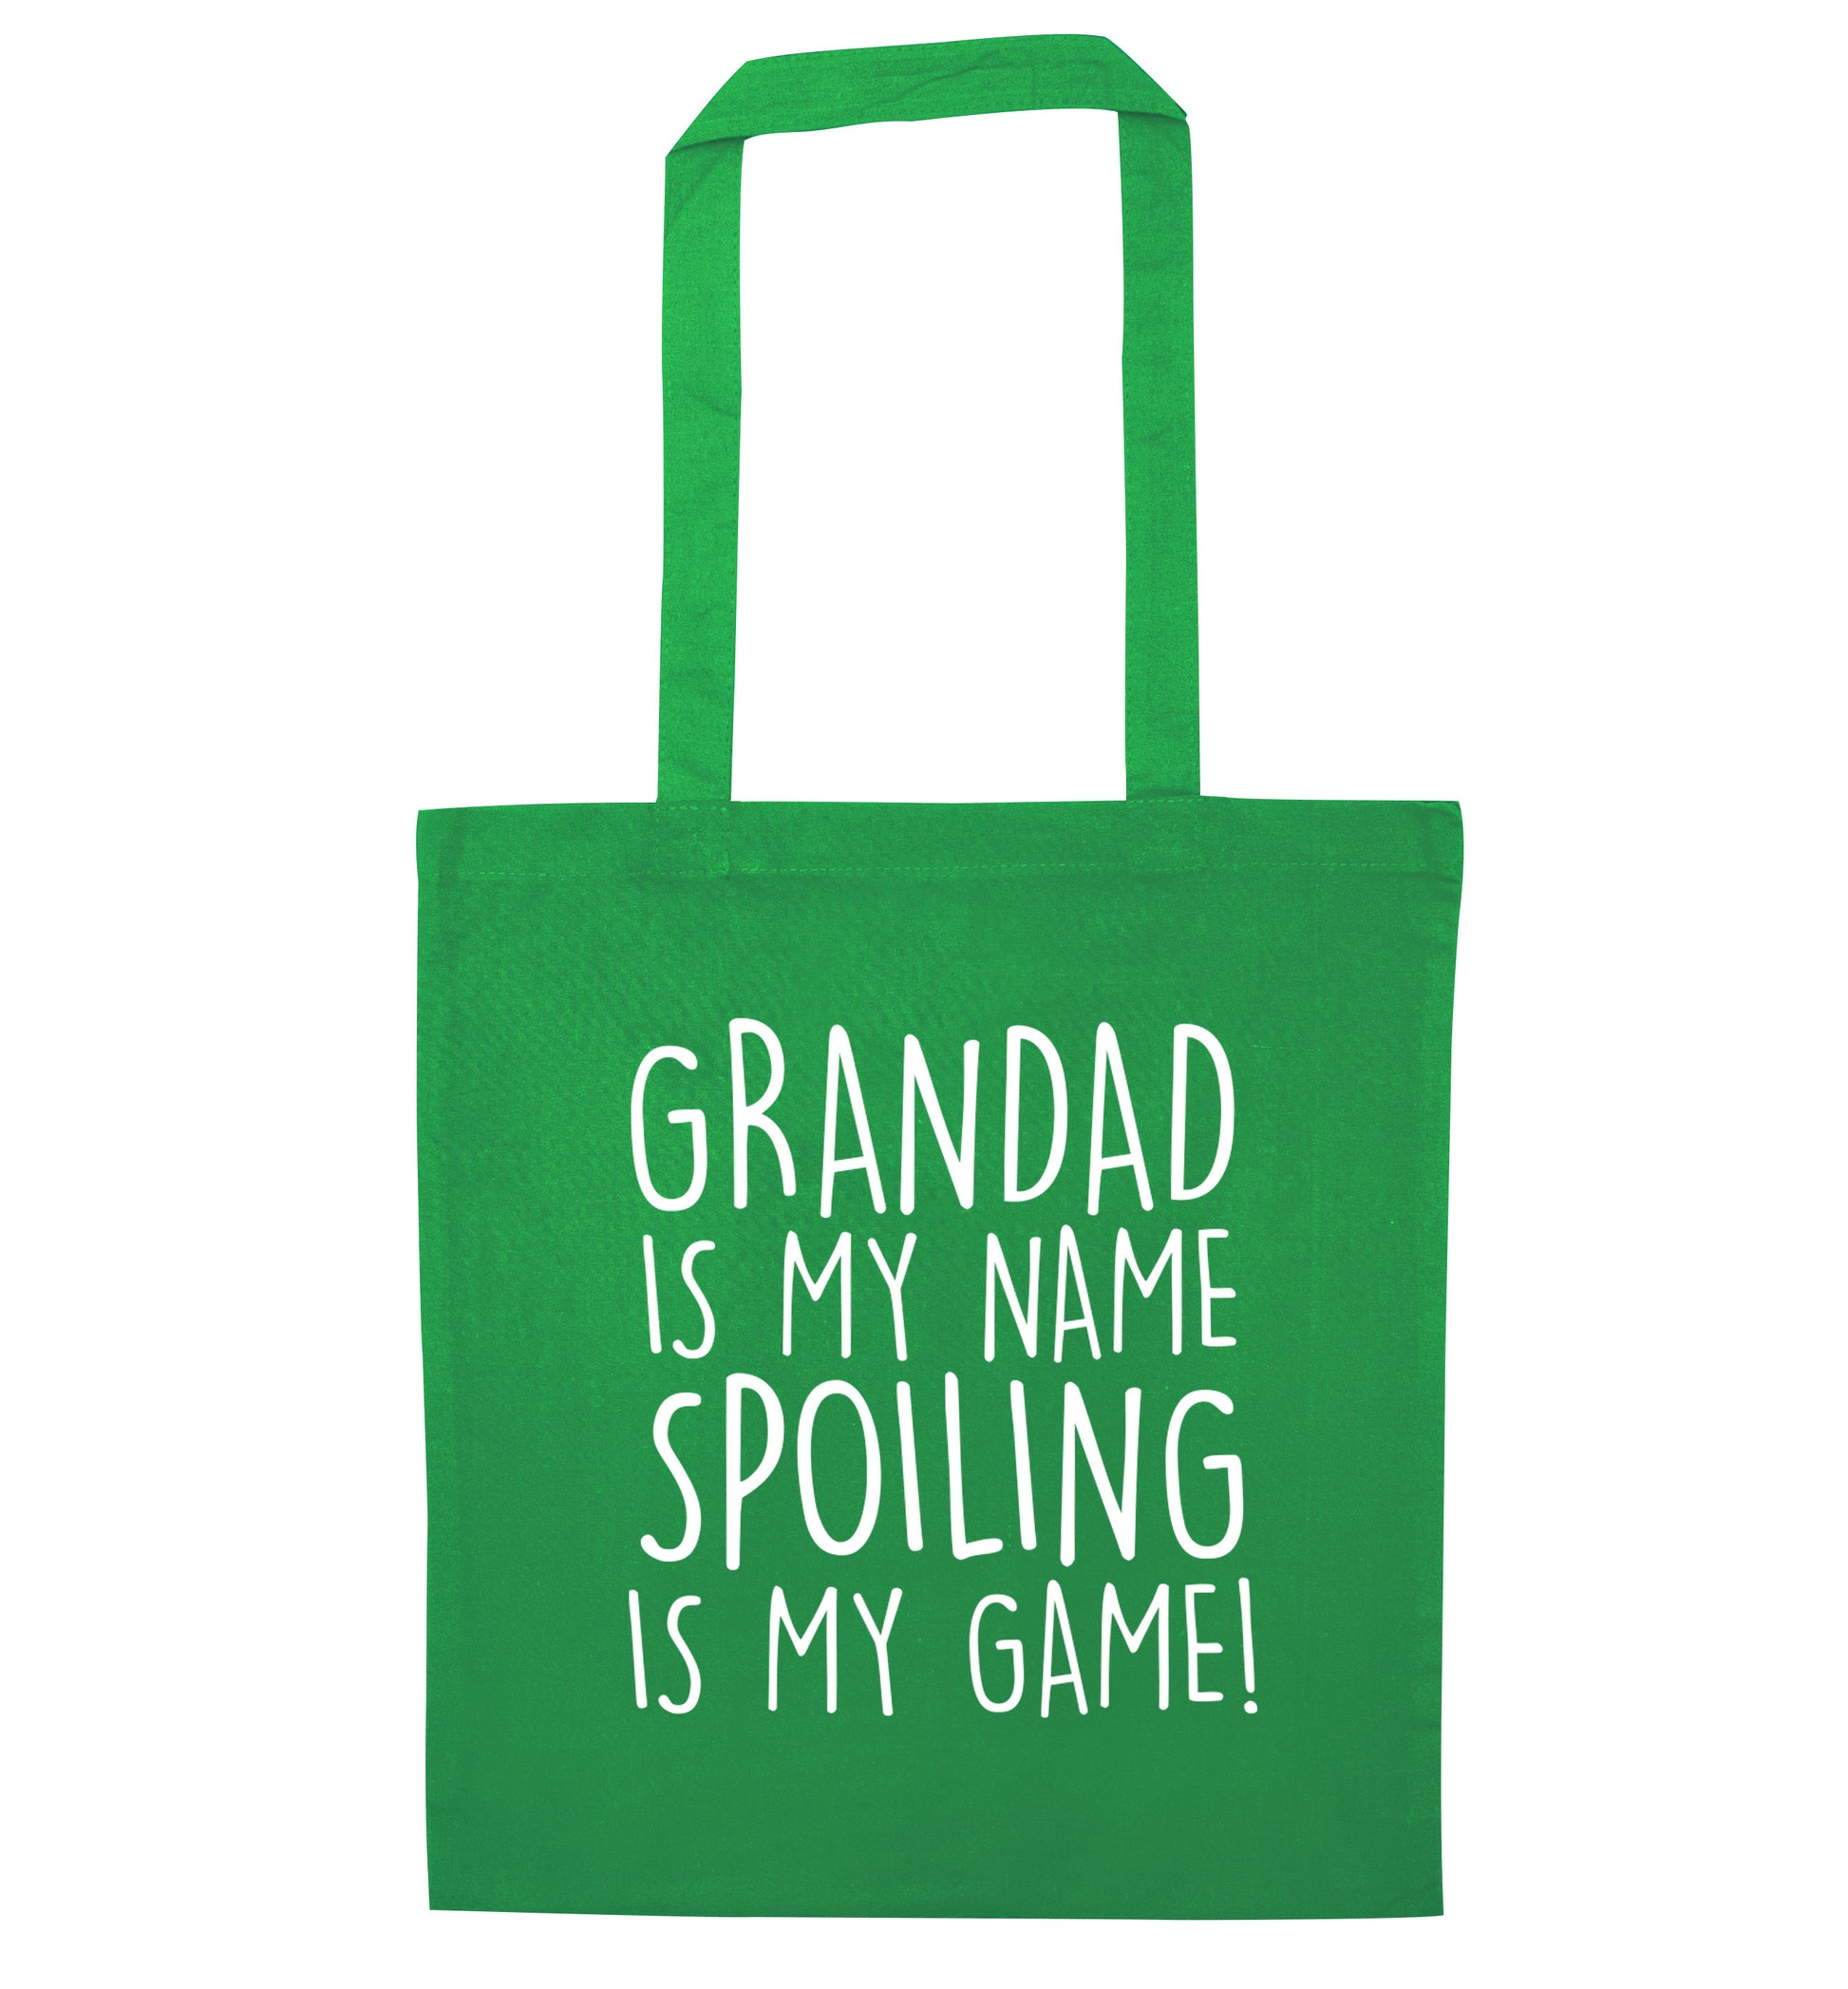 Grandad is my name, spoiling is my game green tote bag